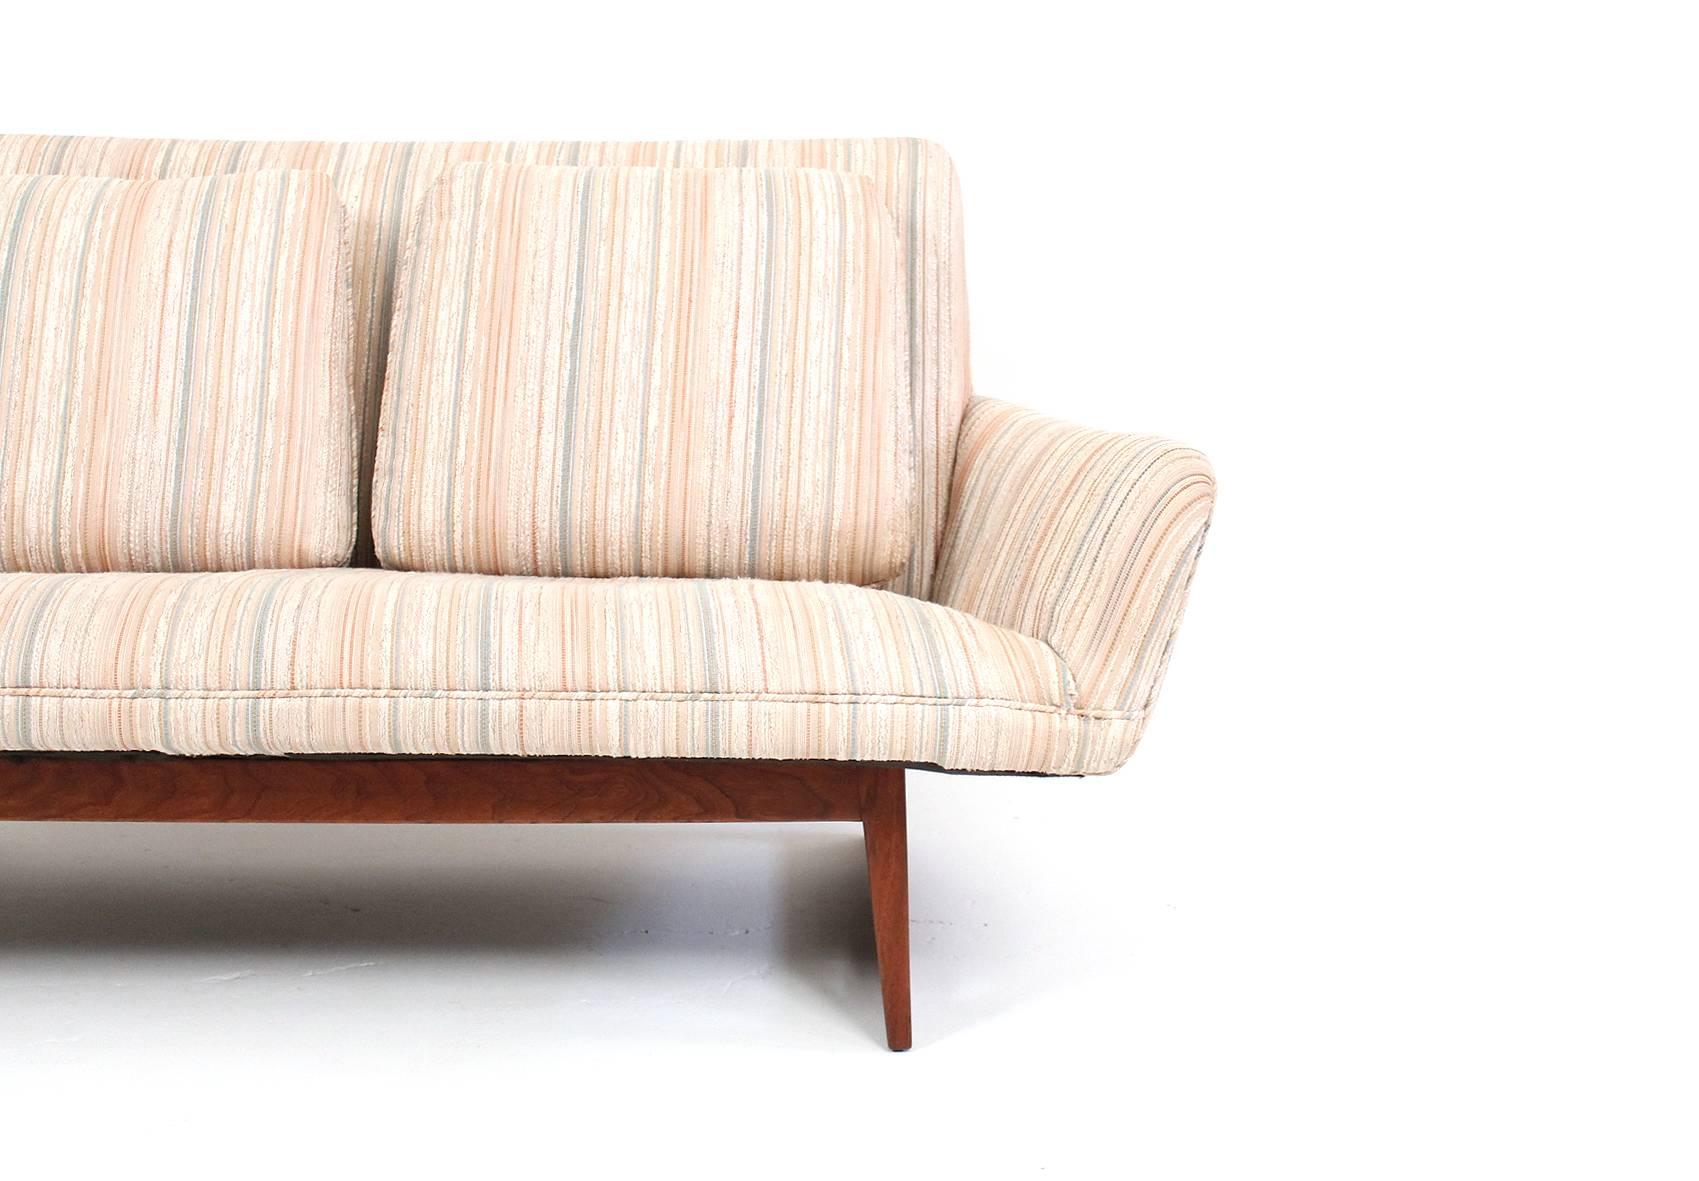 Mid-20th Century Sculptural Jens Risom Sofa or Settee